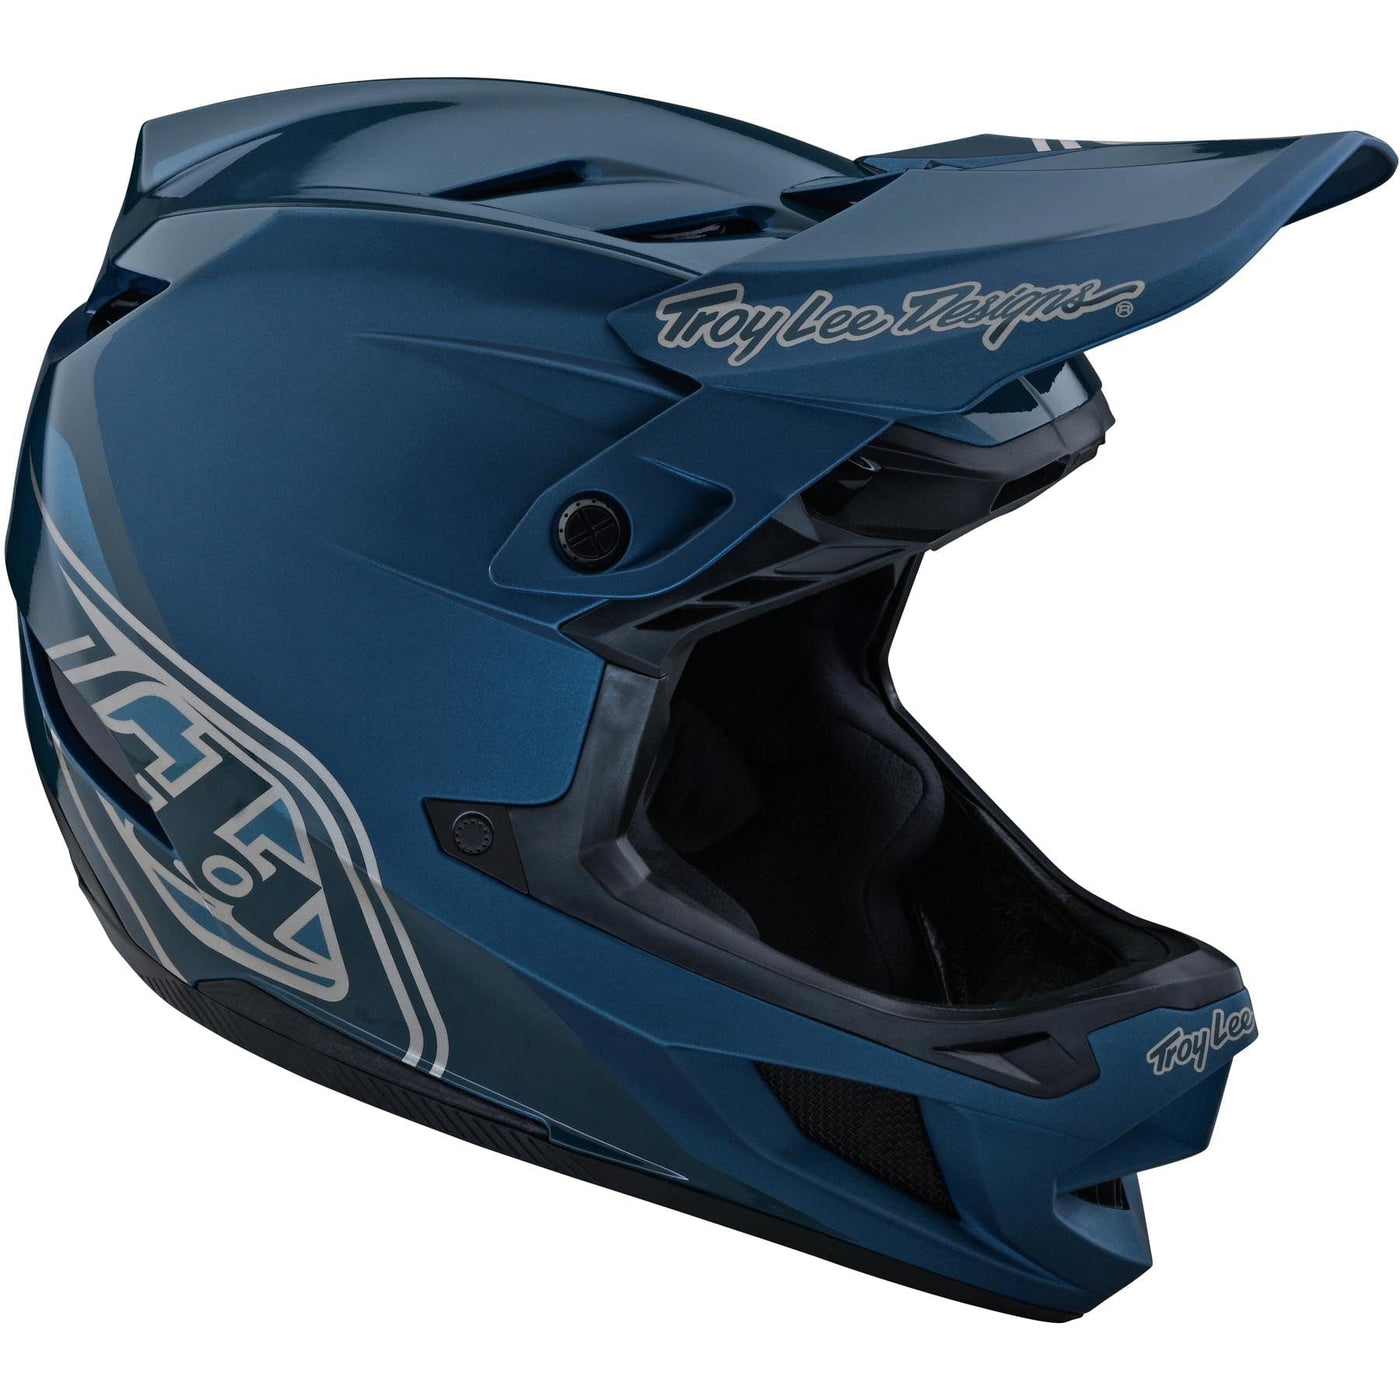 TLD D4 Polyacrylite MIPS Helmet Shadow - Blue 8Lines Shop - Fast Shipping